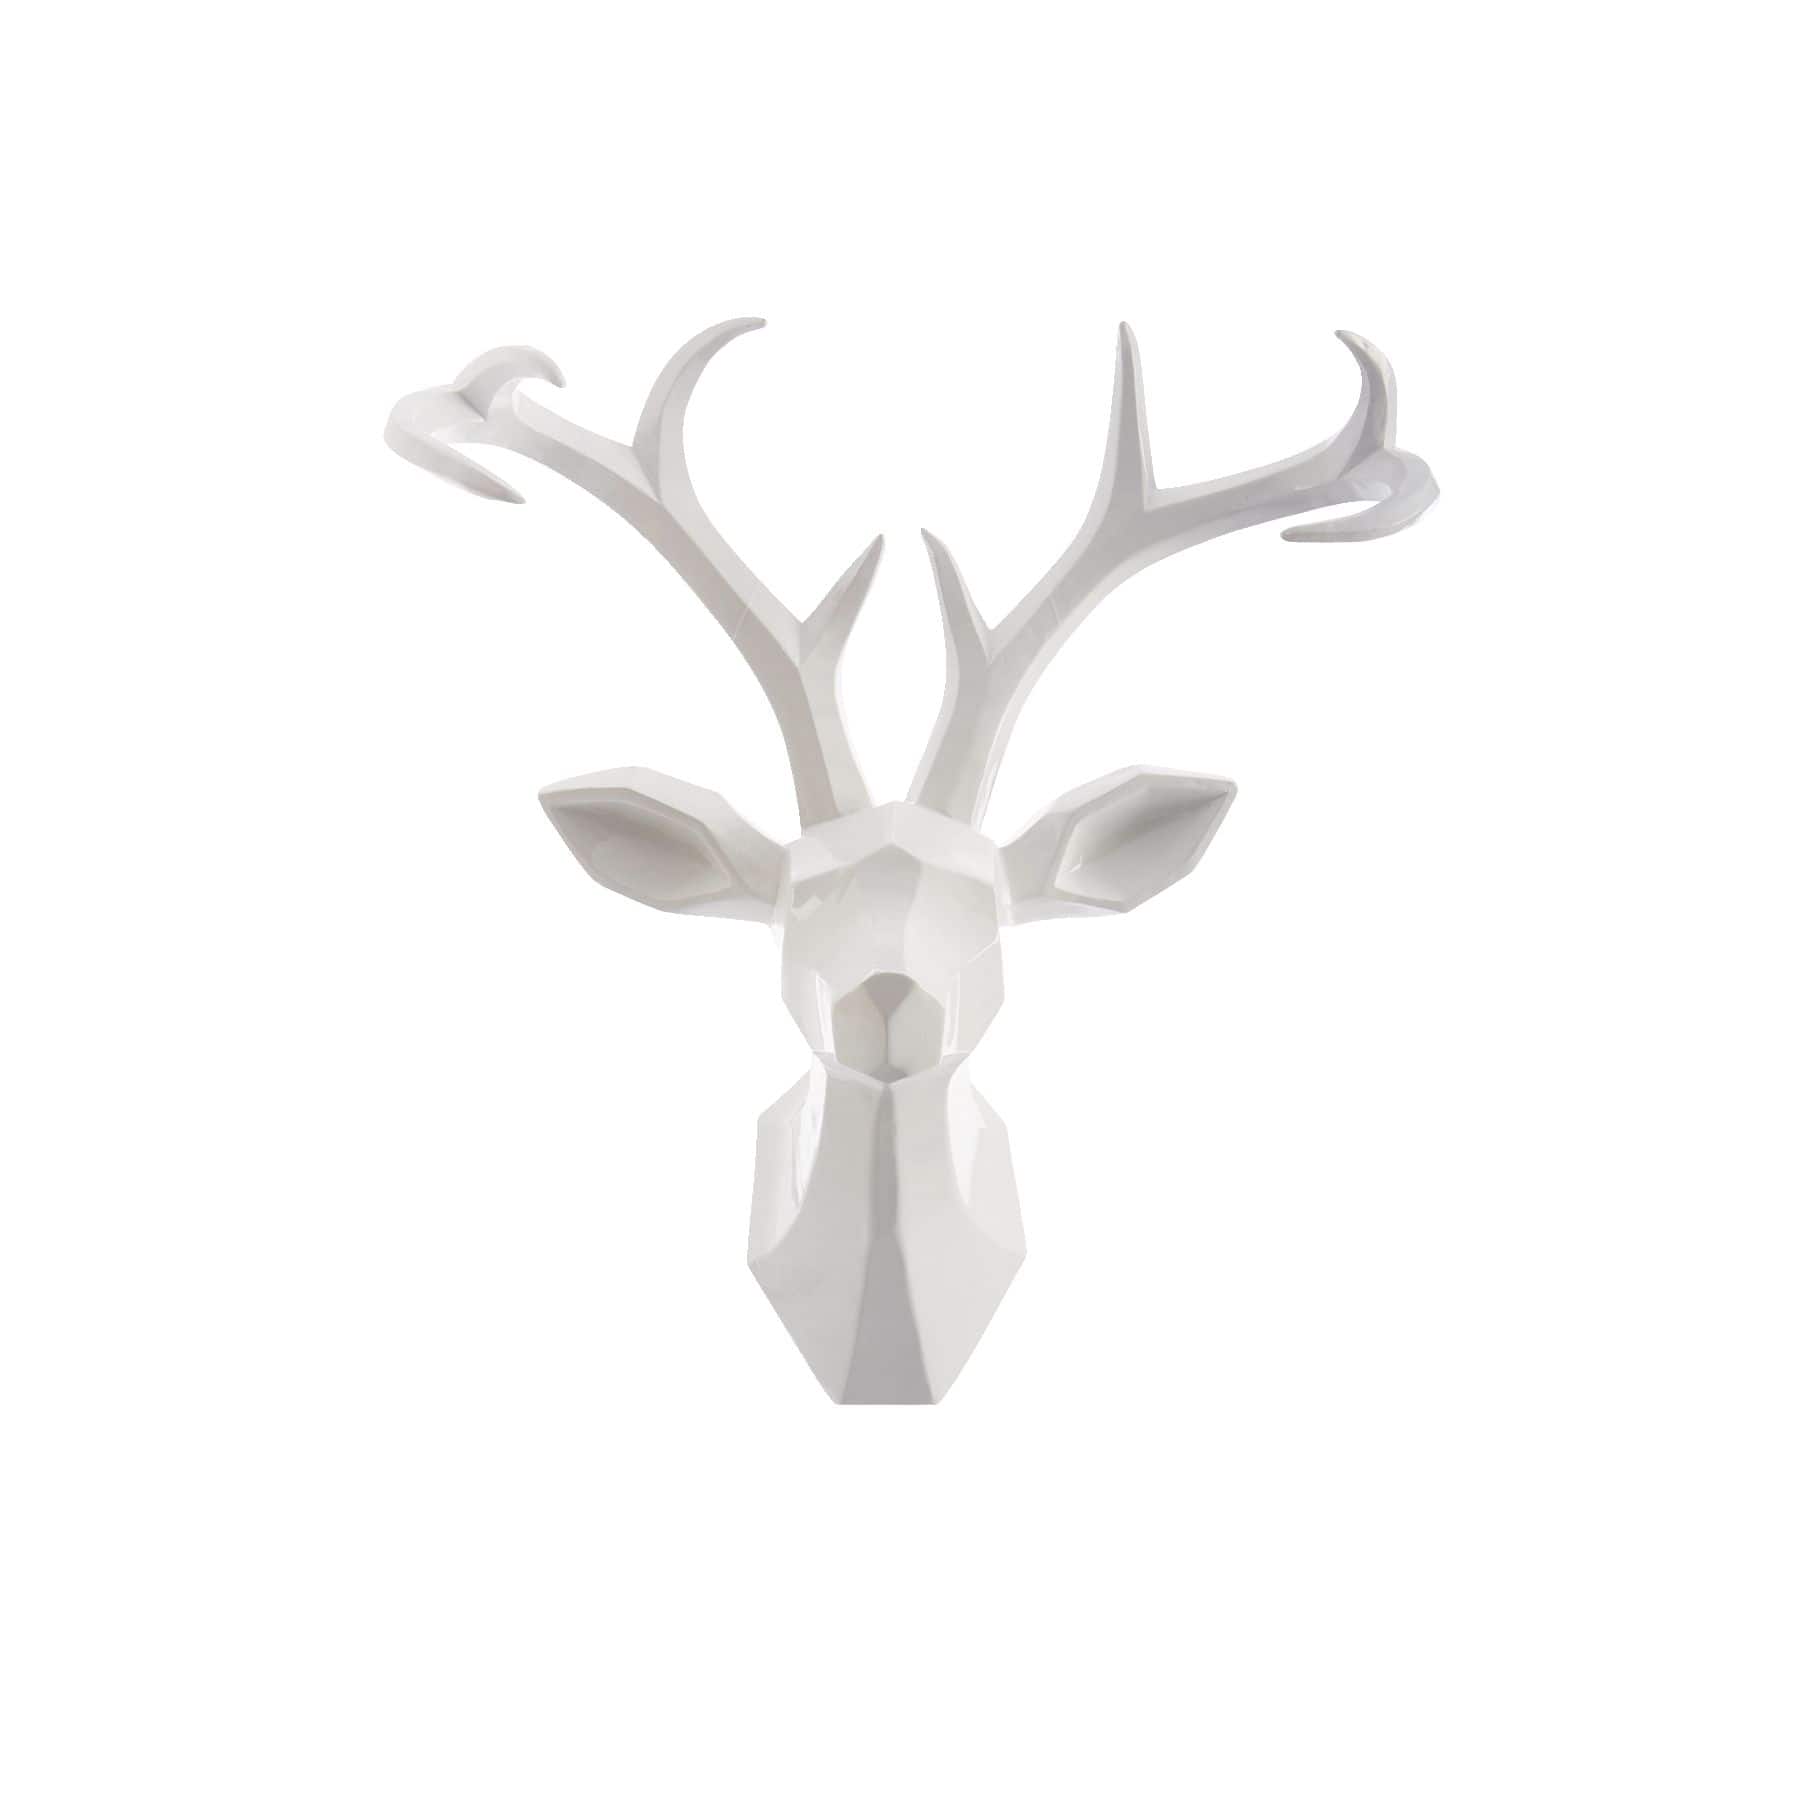 CANVAS Resin Wall Mount Christmas Reindeer Head Décor, White, 22 1/2-in